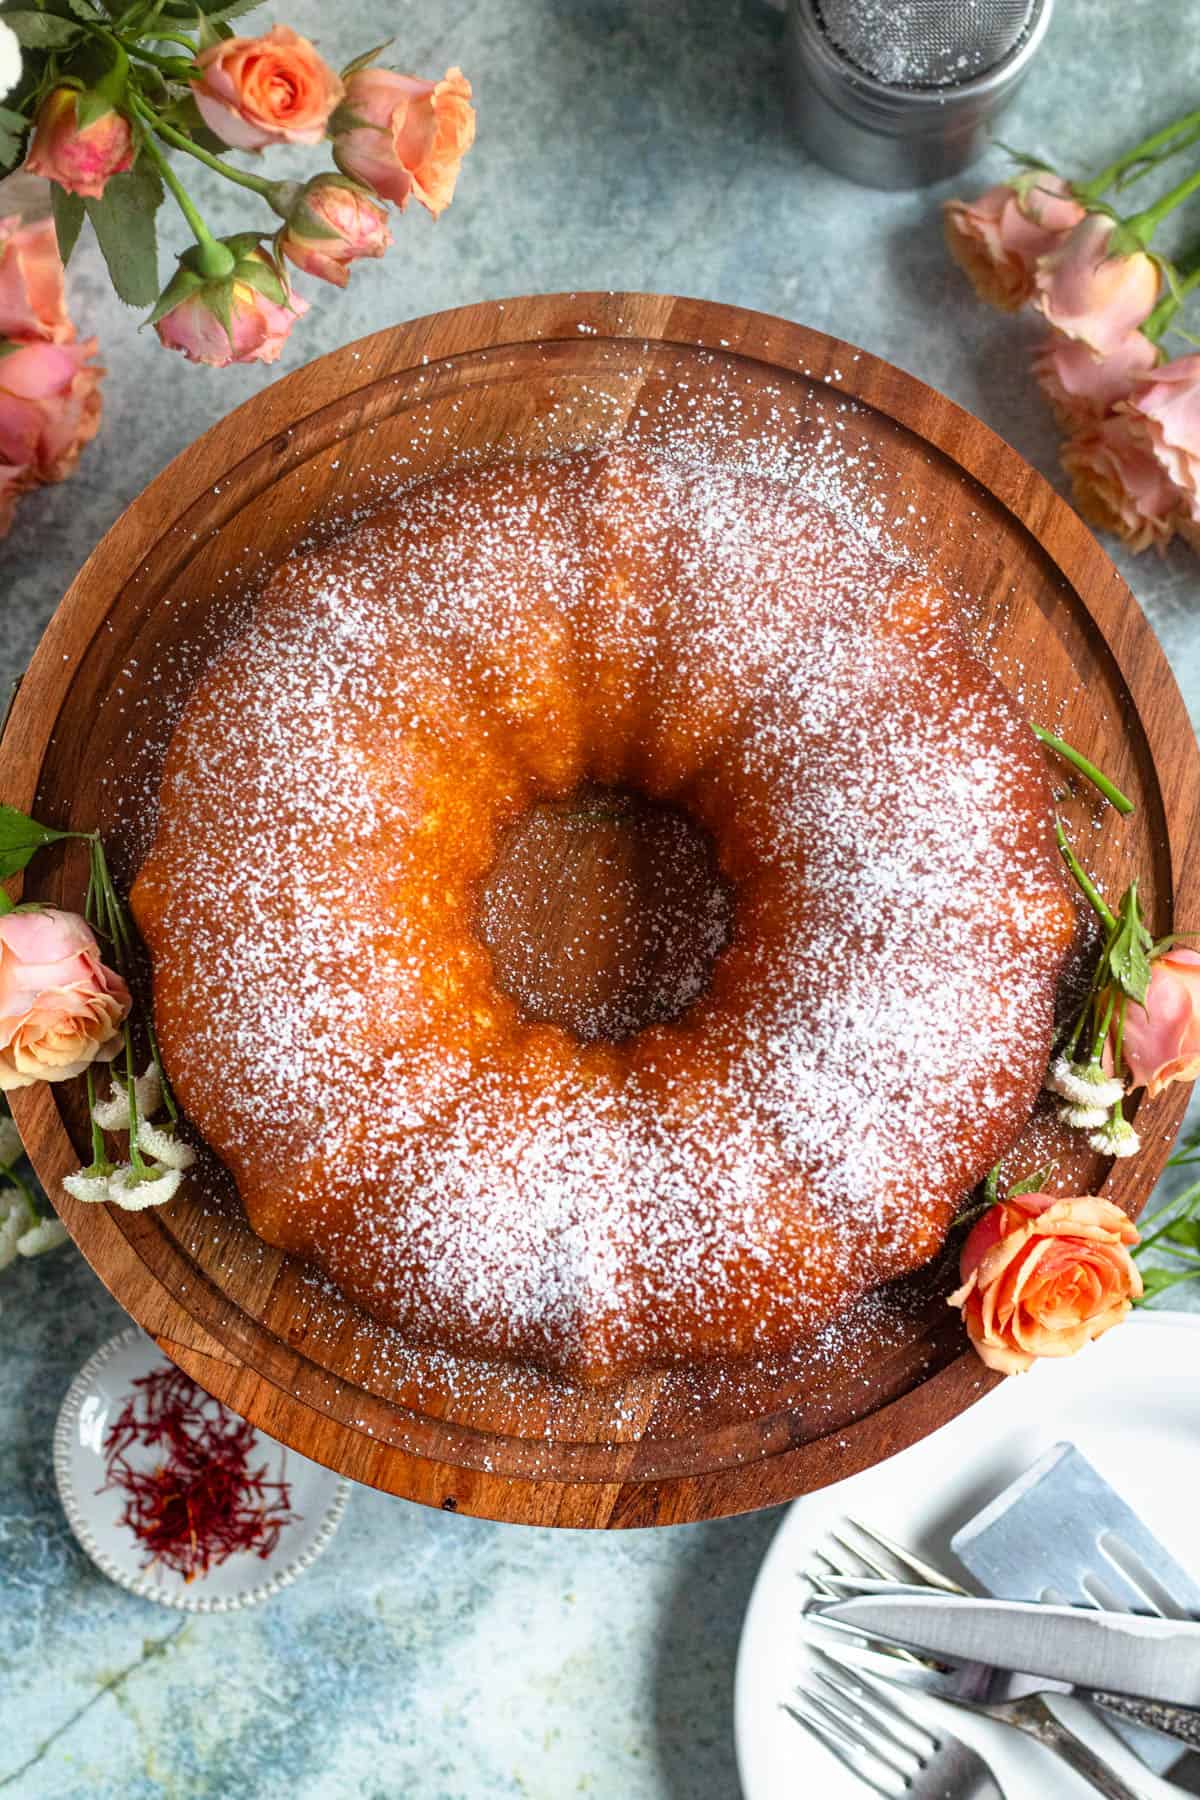 Top view of a baked cardamom cake dusted with powdered sugar and orange roses garnished on the side. 